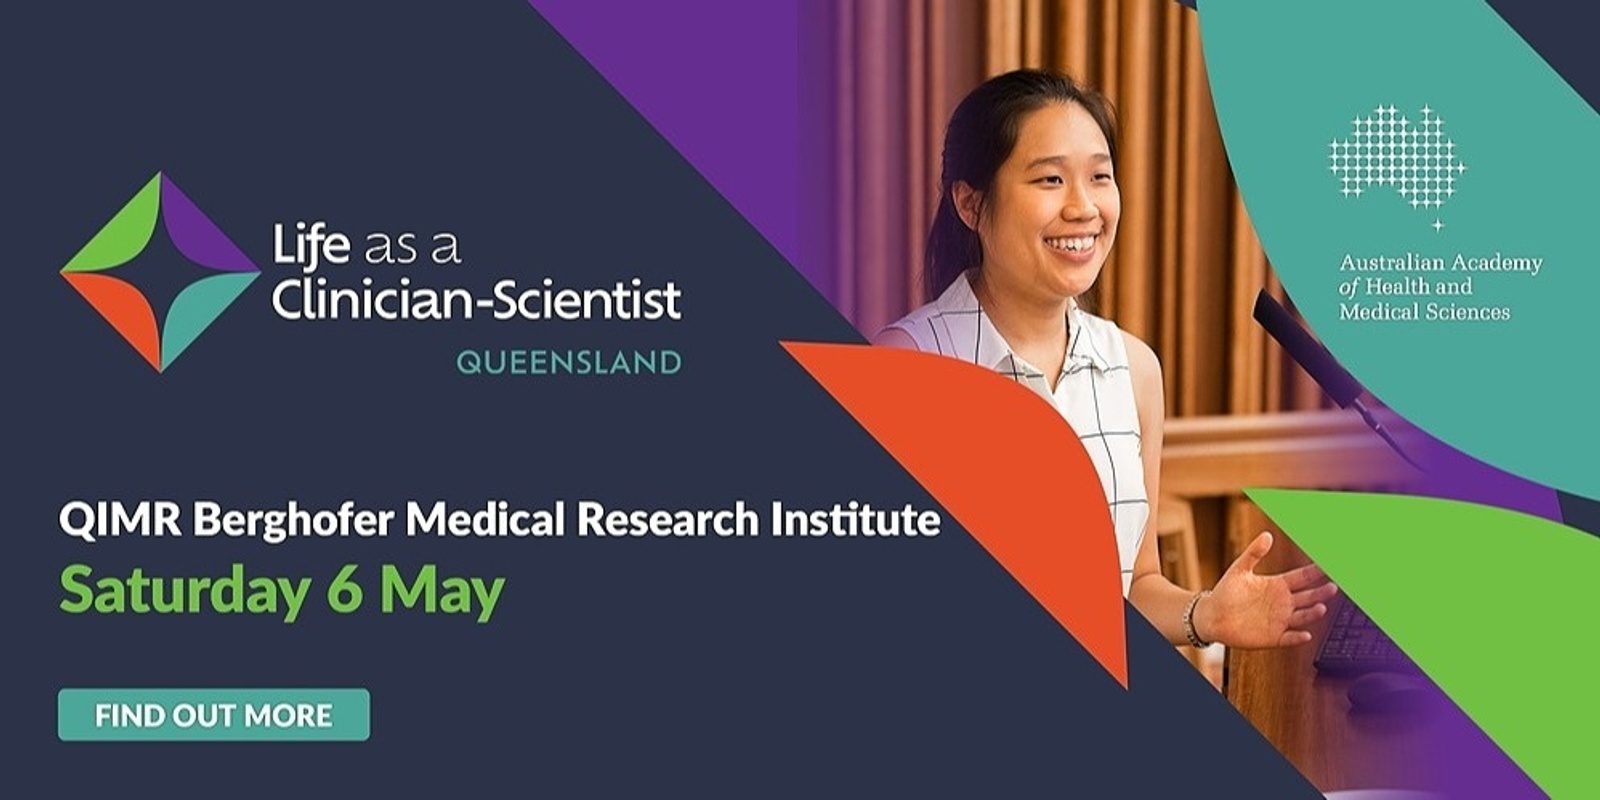 Banner image for 2023 Life as a Clinician-Scientist, Queensland